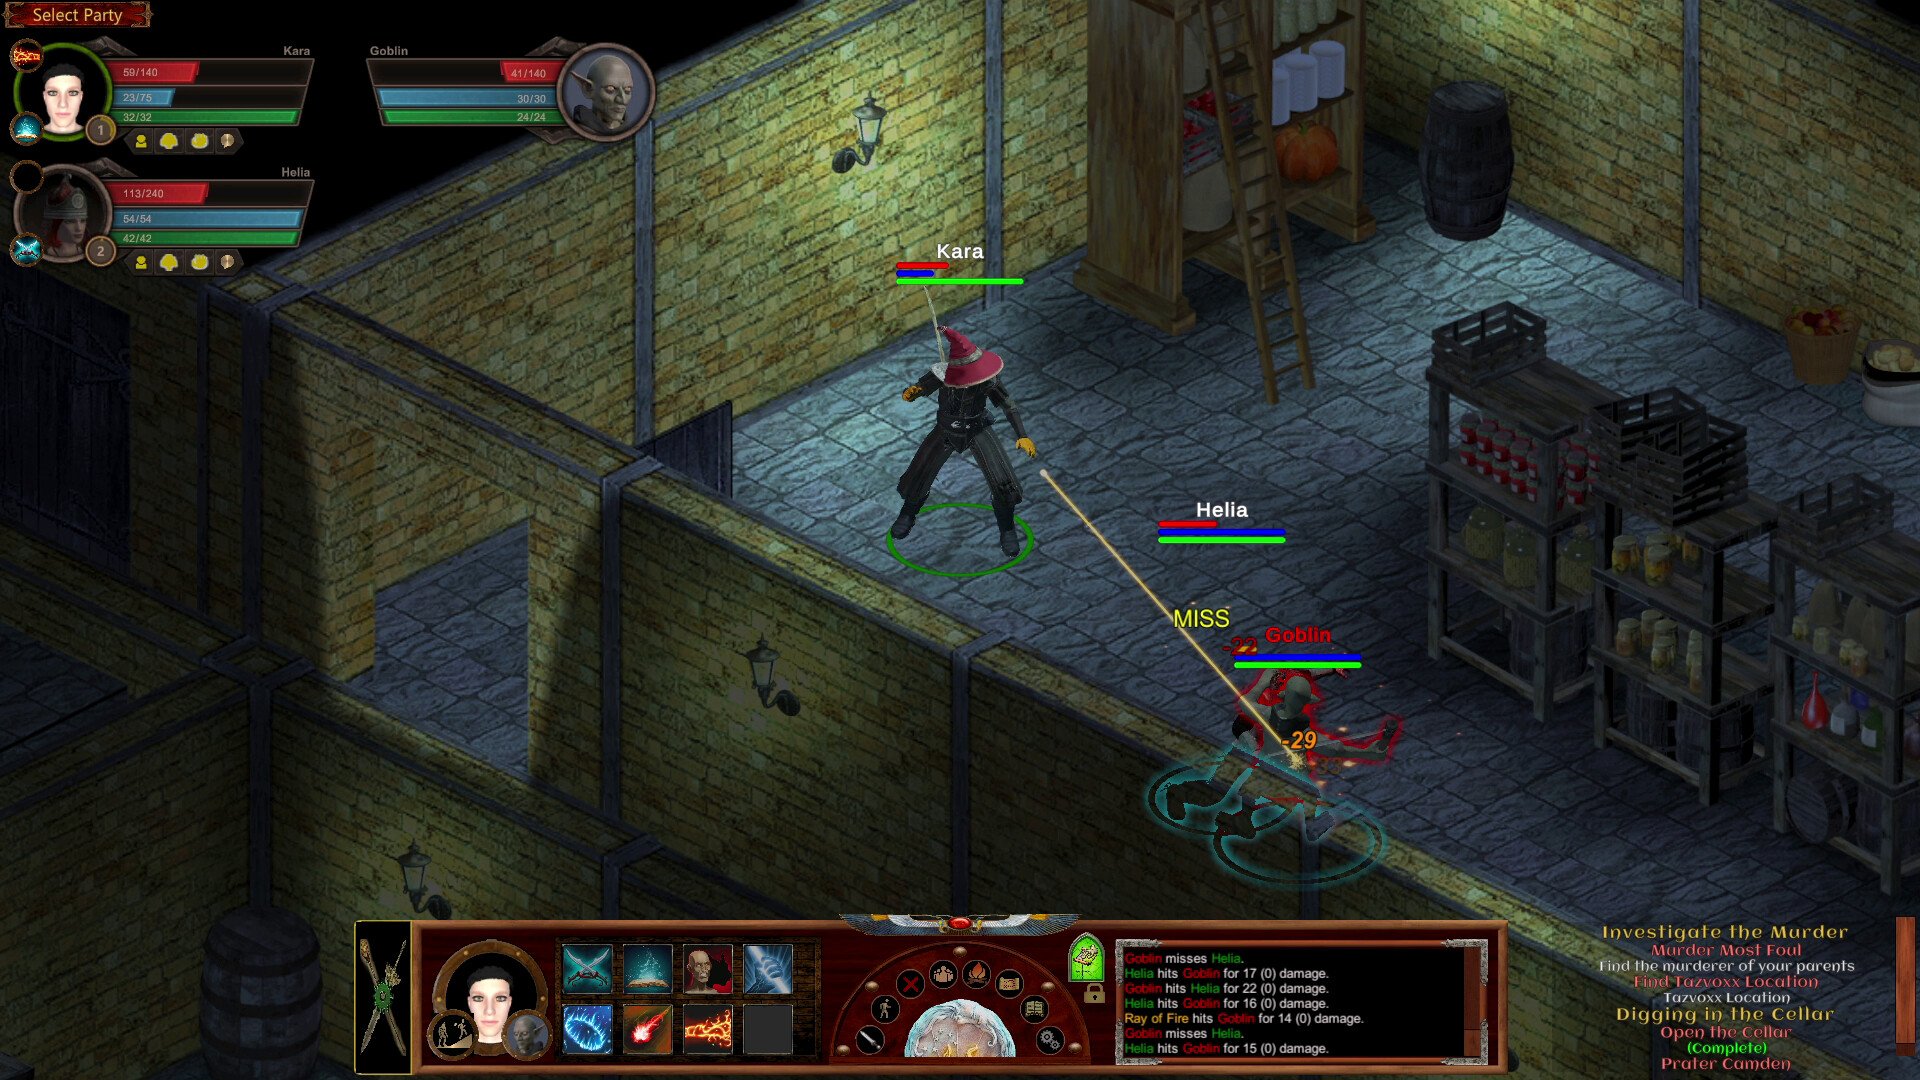 Two game characters fighting in open roof building. Image is from Passageway of the Ancients.